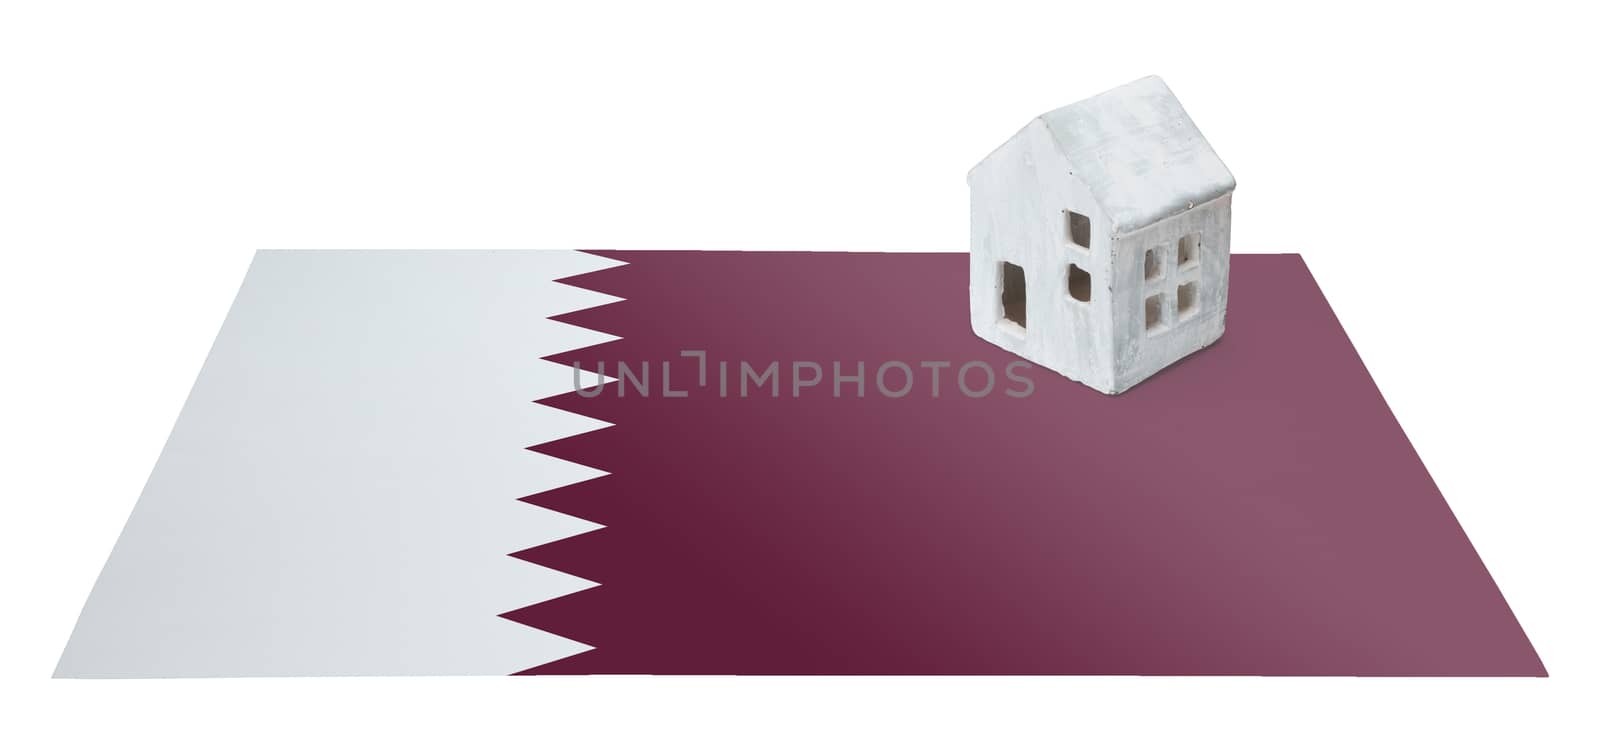 Small house on a flag - Qatar by michaklootwijk